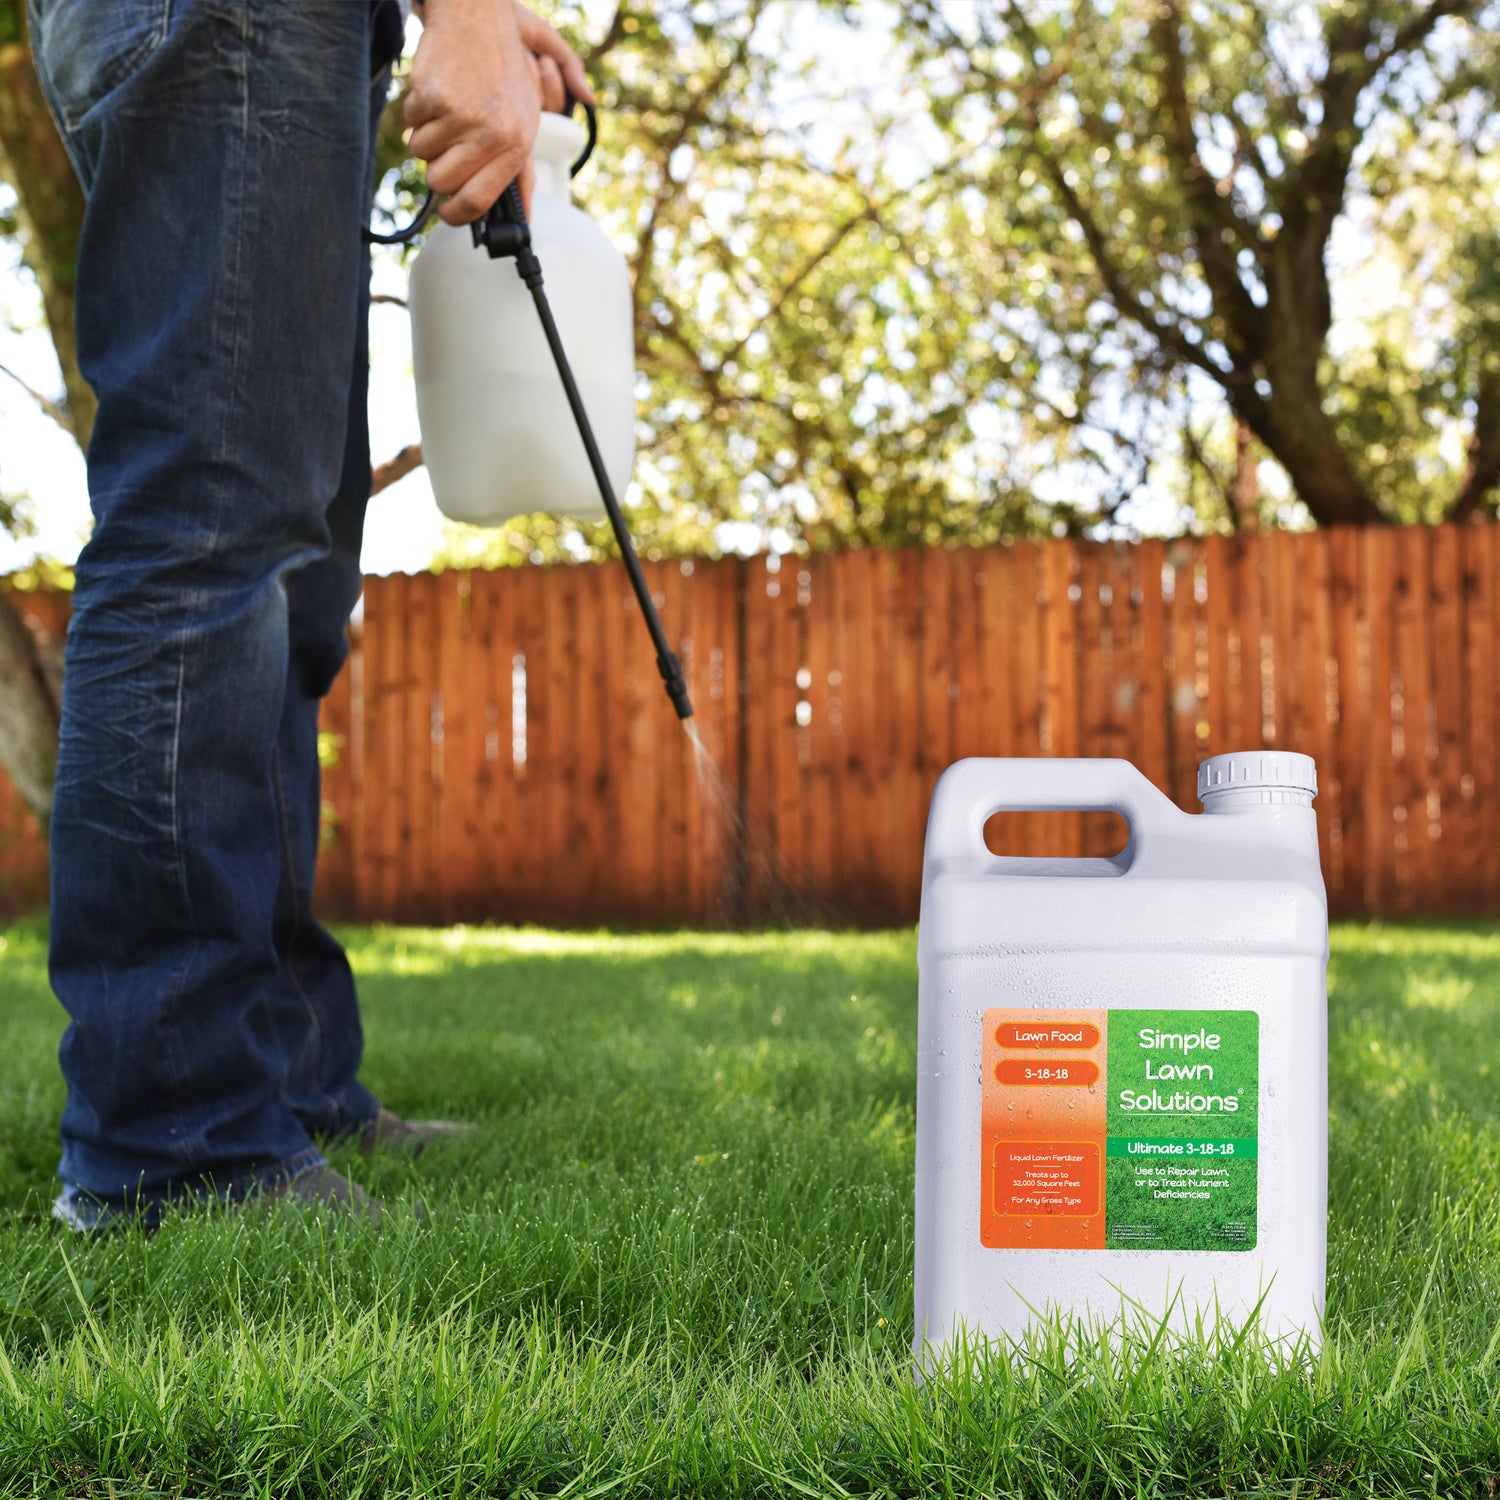 simple lawn solutions fertilizer applied to lawn with pump-sprayer